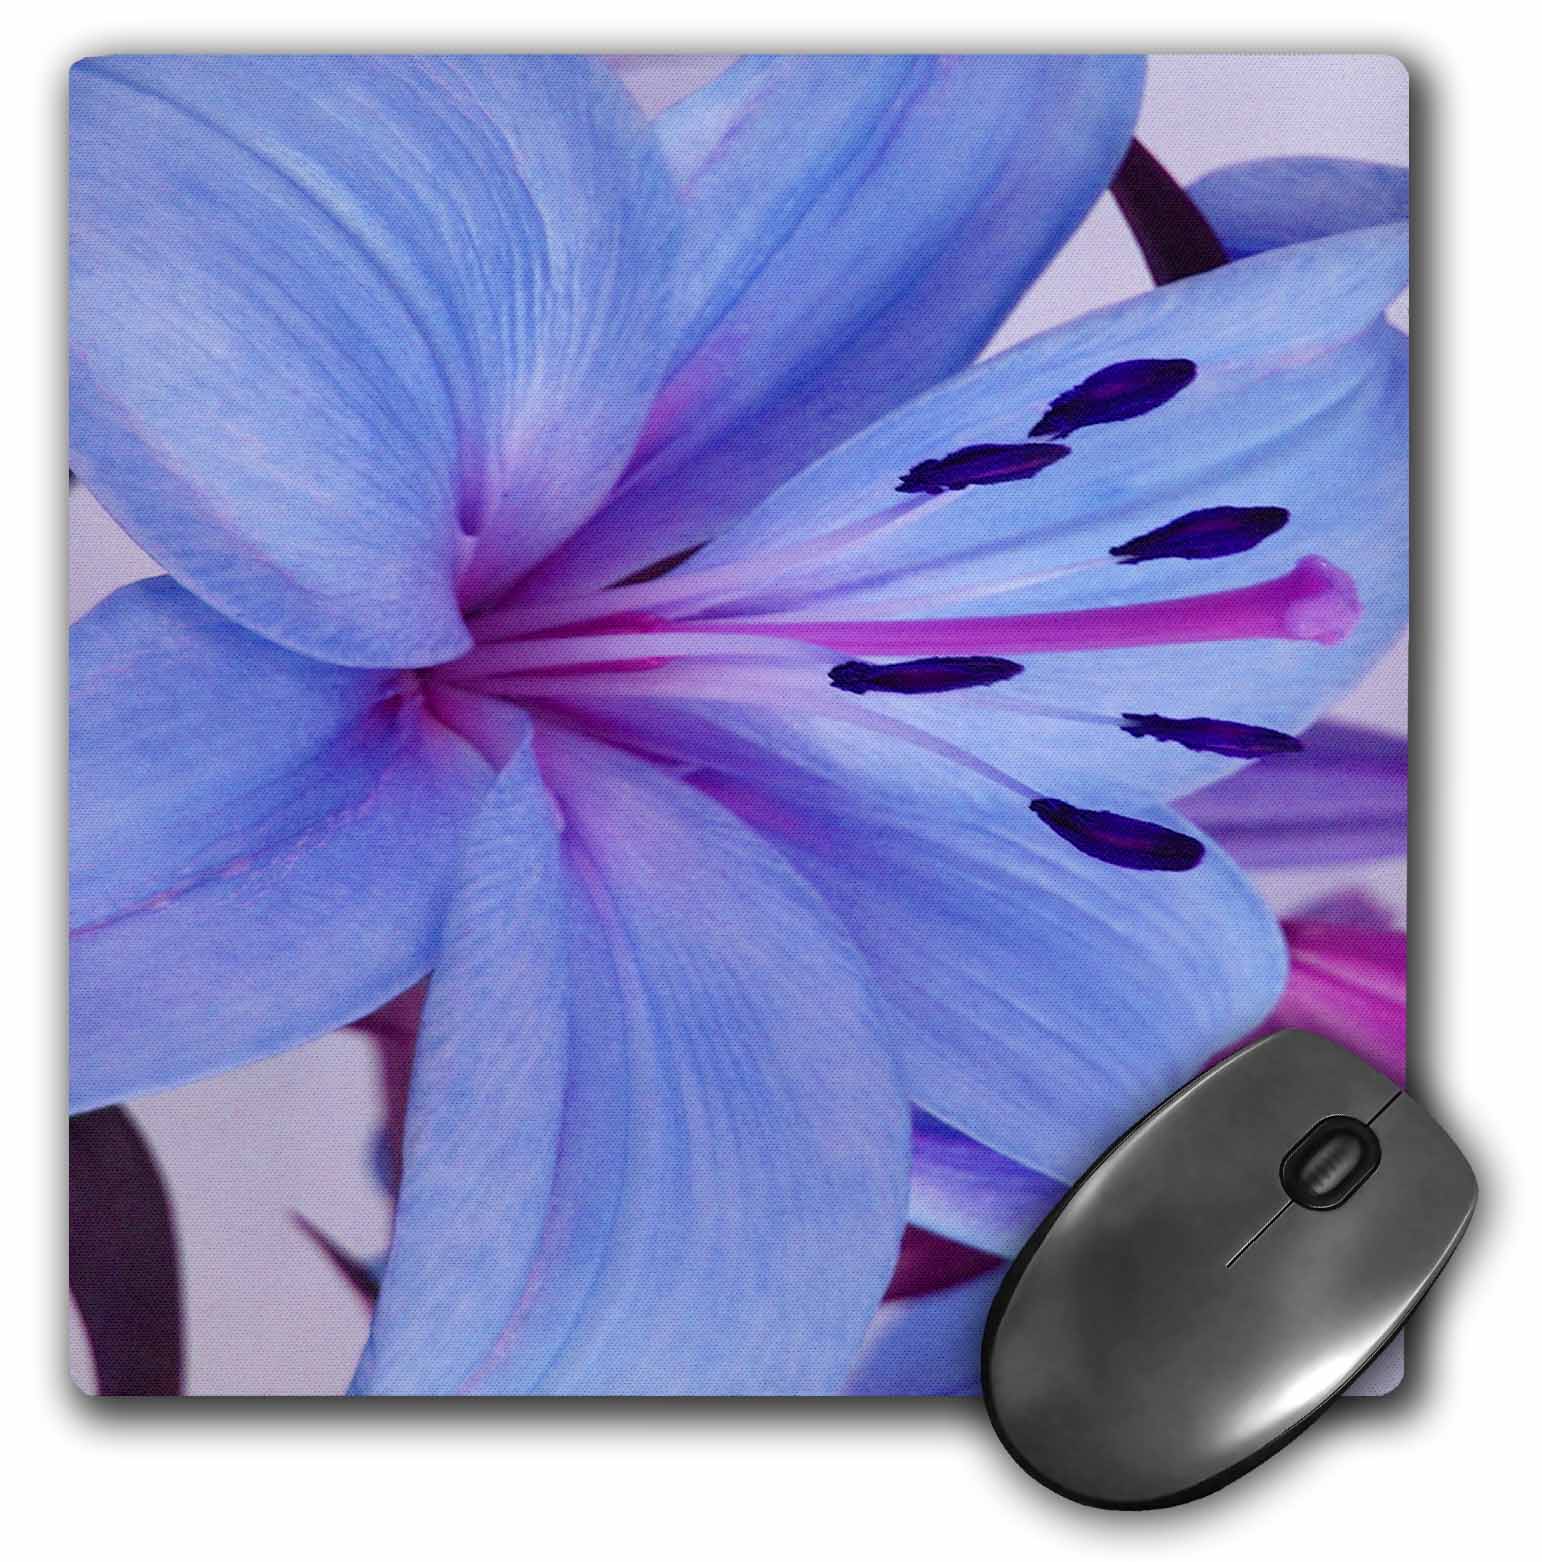 3dRose Delicate Blue Oriental Lily, Mouse Pad, 8 by 8 inches - image 1 of 1